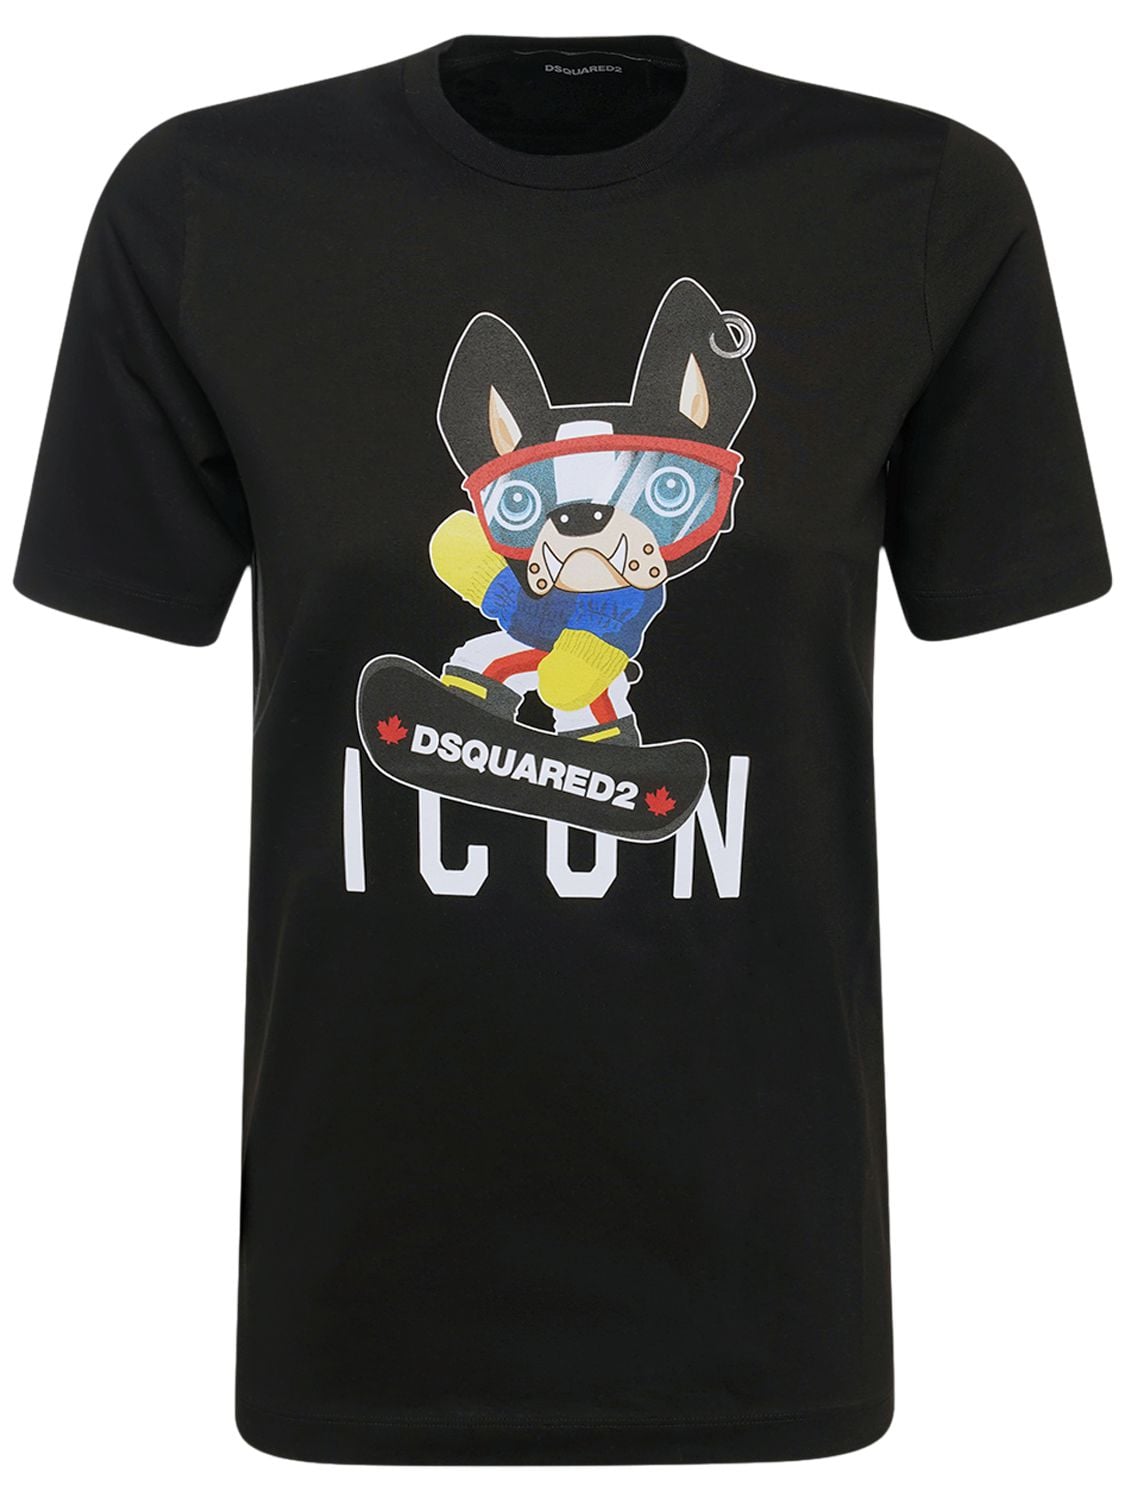 DSQUARED2 ICON PATCH COTTON JERSEY T-SHIRT,74I07Y144-OTAW0